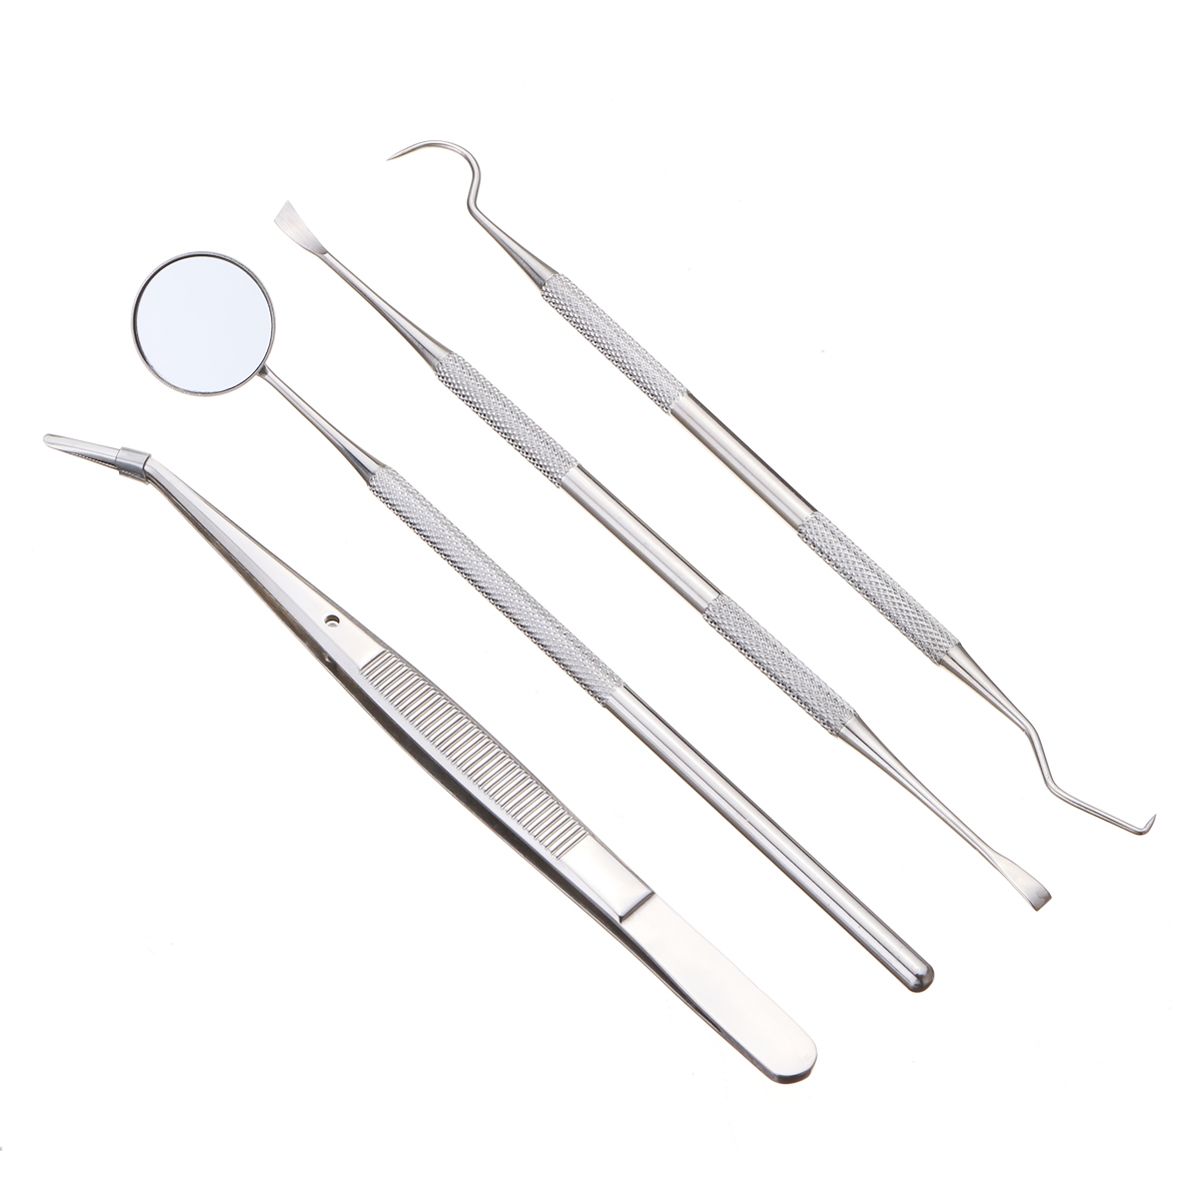 4-Pcs-PVC-Stainless-Steel-Oral-Mirror-Probe-Dental-Care-Tools-Tartar-Remover-1212390